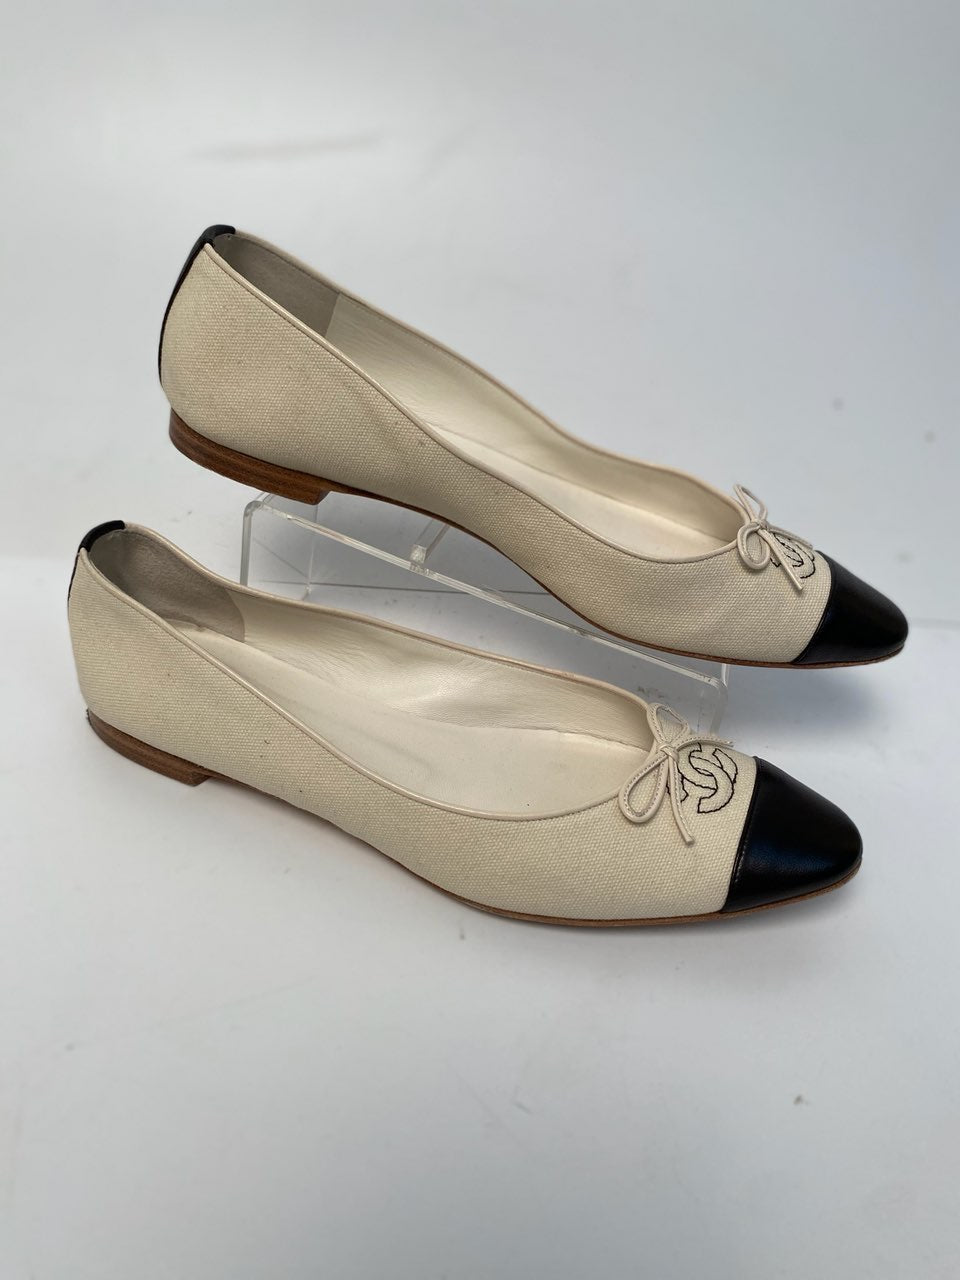 Chanel Mary Jane Ballet Flat Shoes Pearl Button Sz 40/10